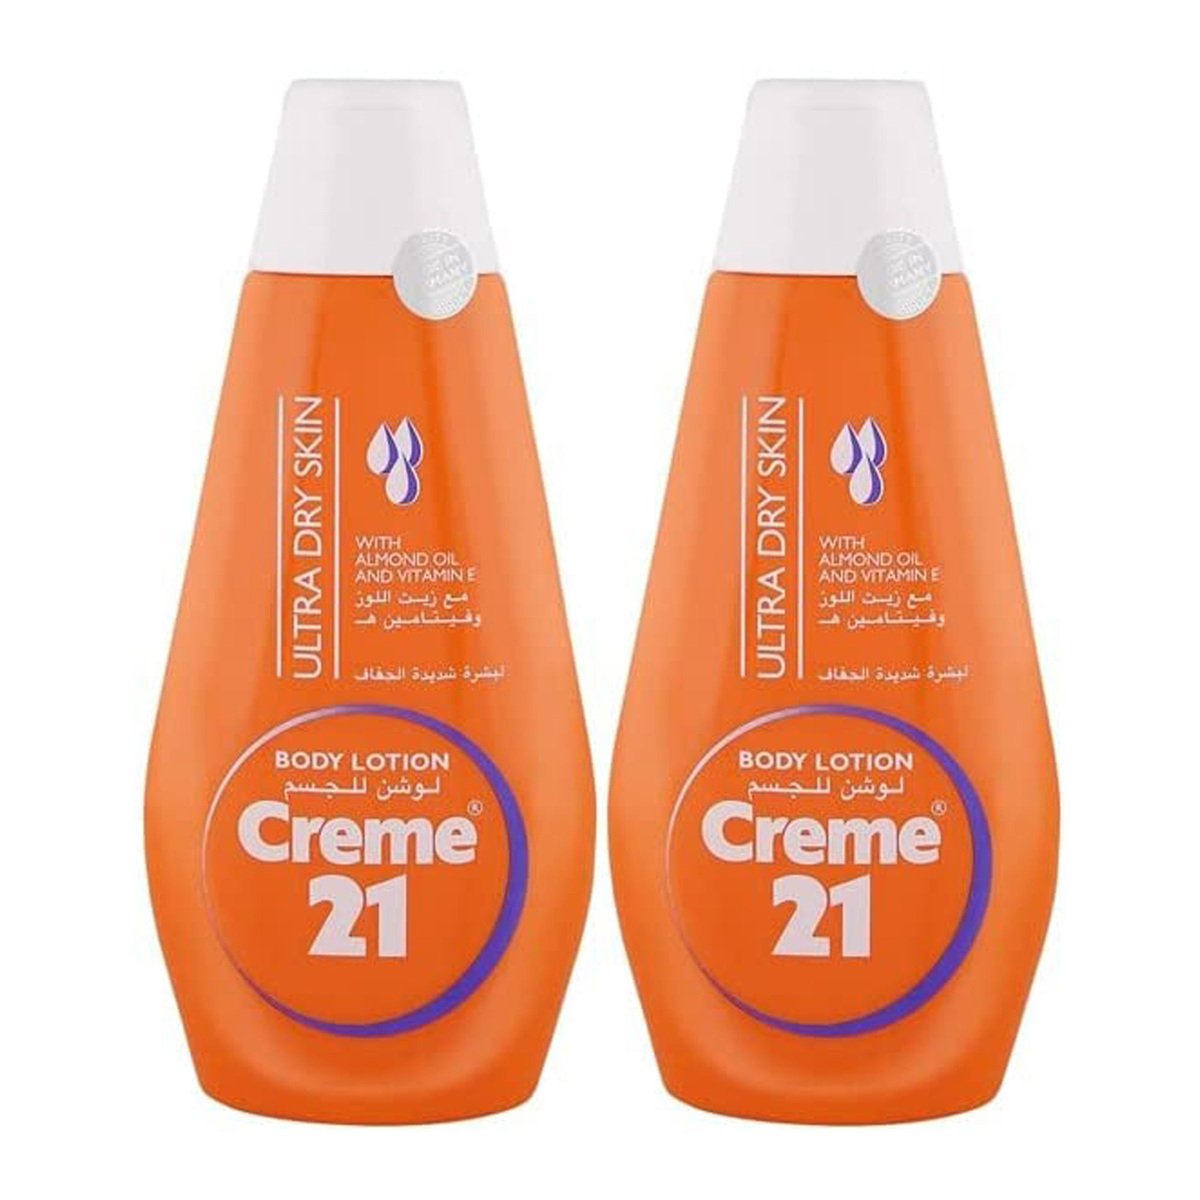 Creme 21 Body Lotion Assorted 2 x 400 ml